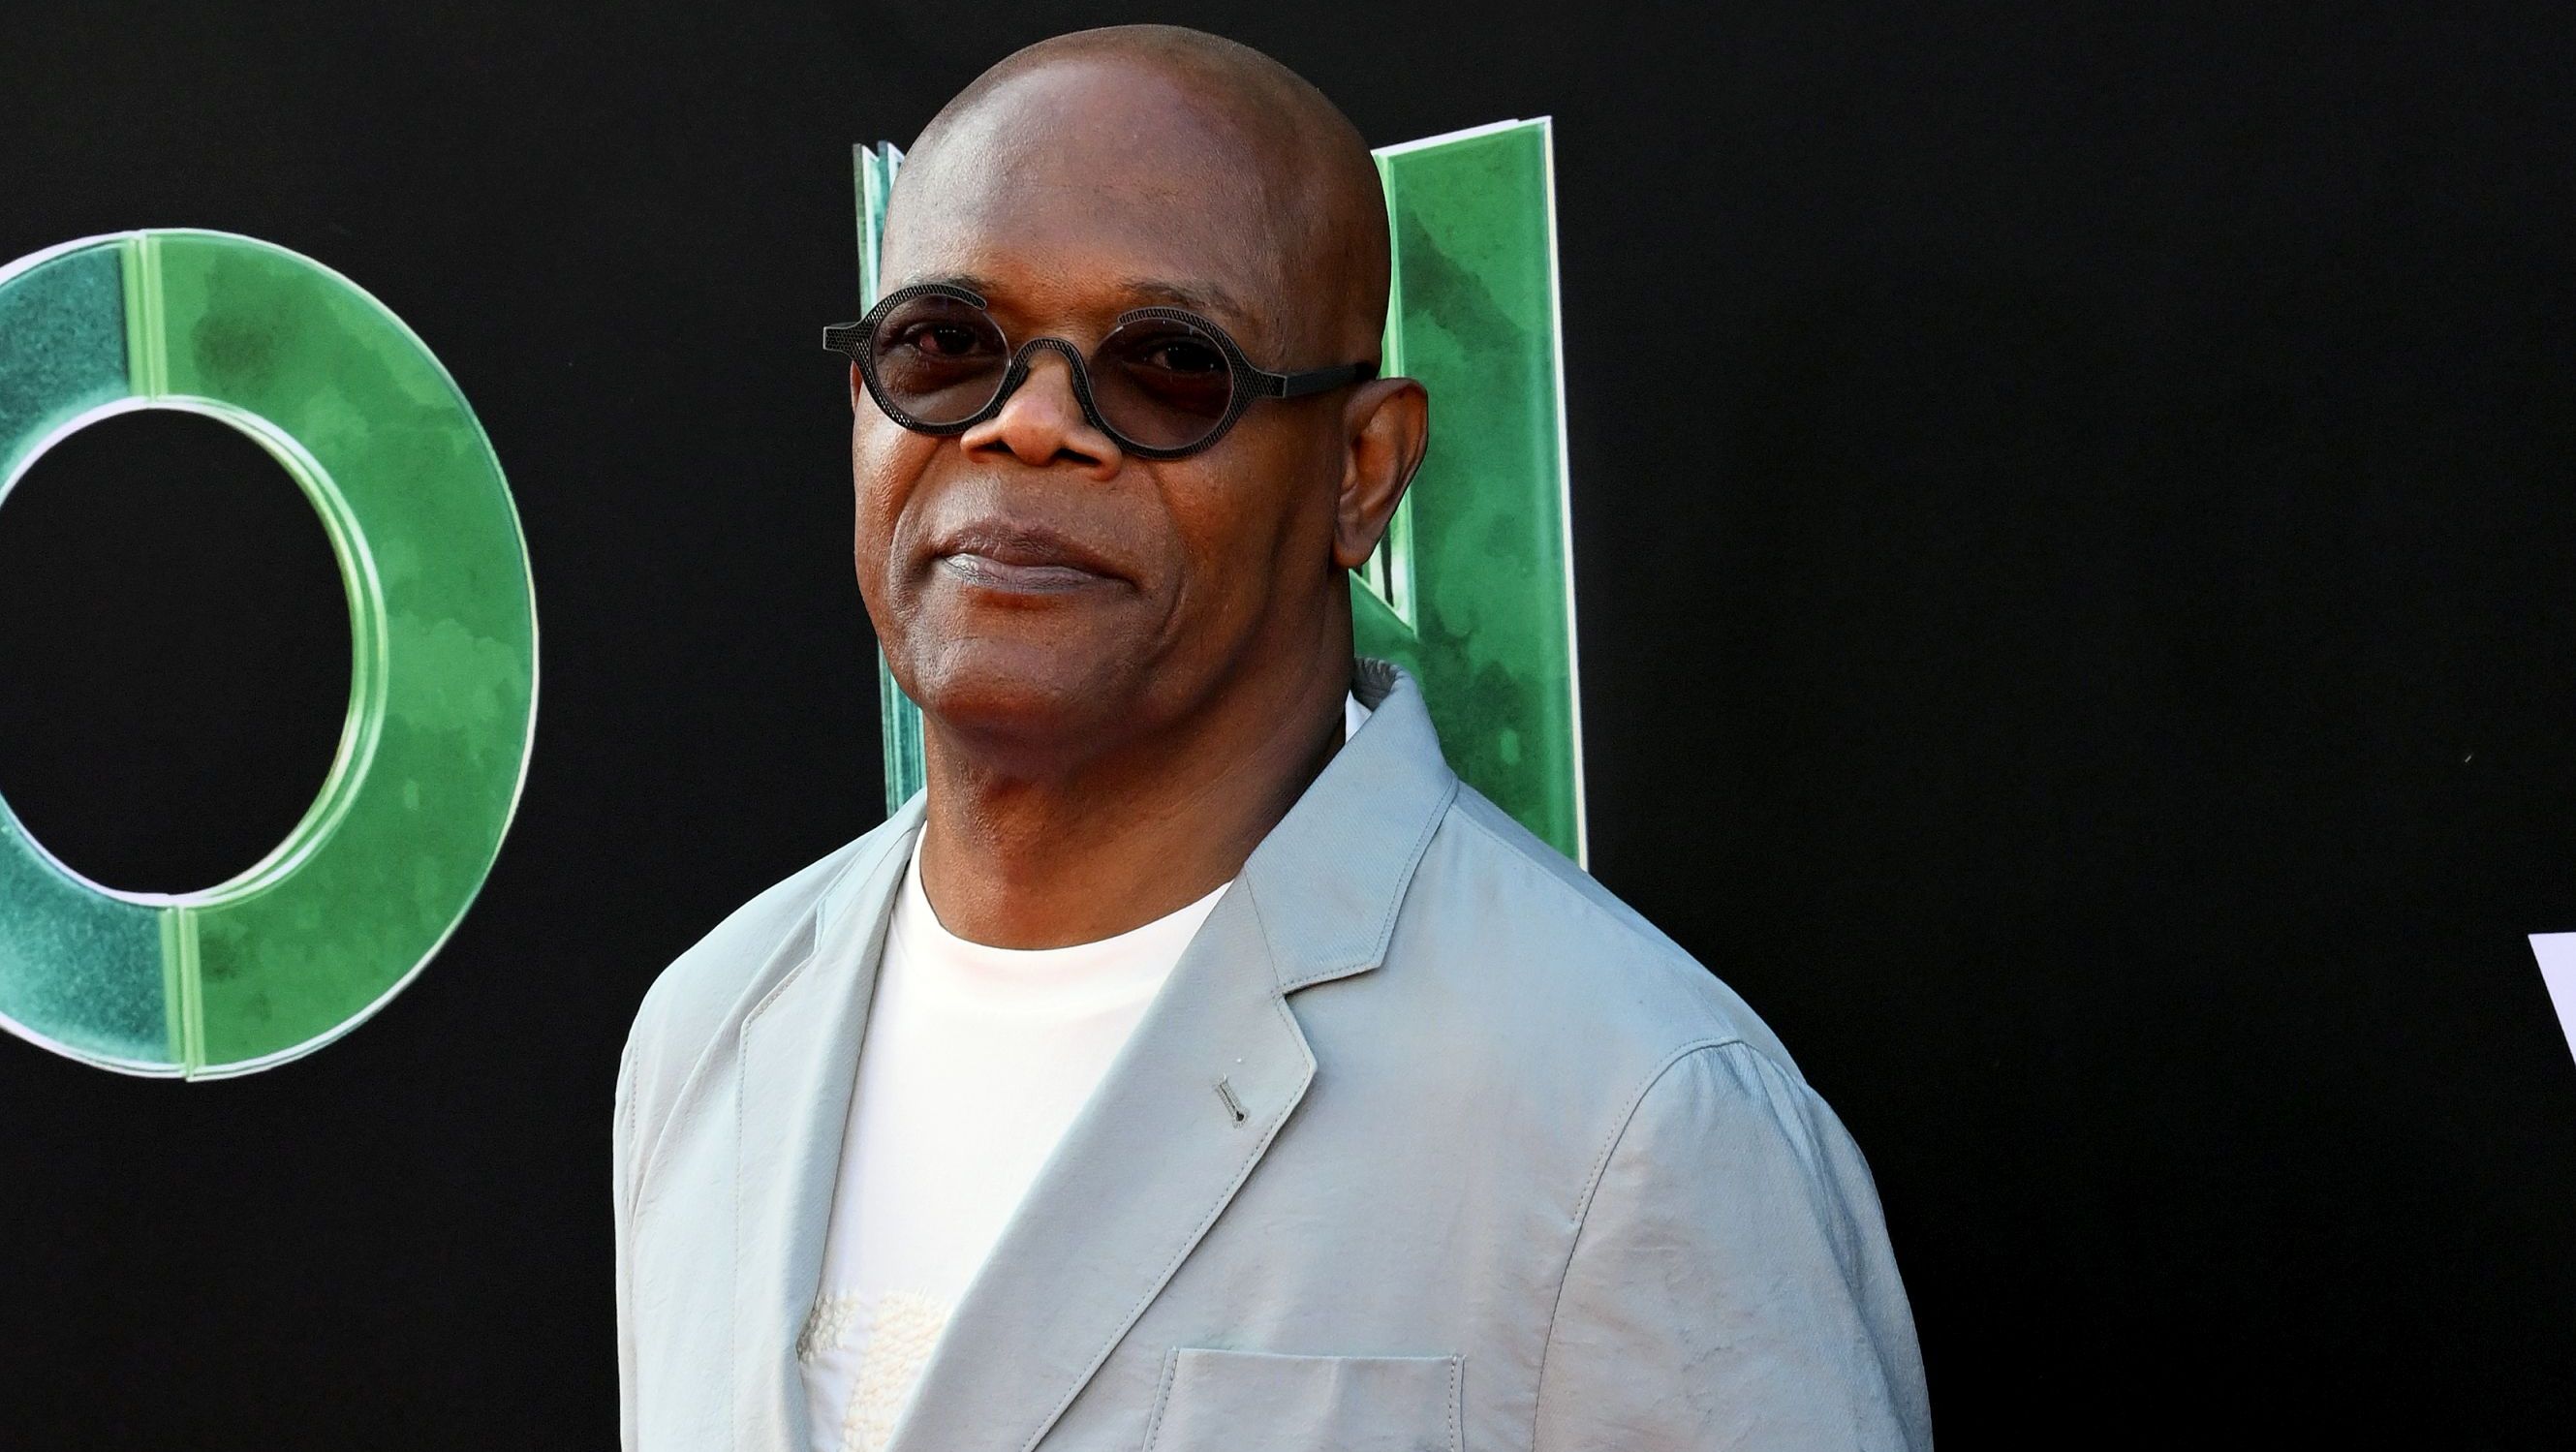 Samuel L. Jackson To Lead Alongside ‘Crazy Rich Asians’ Star Henry Golding in ‘Head Games'